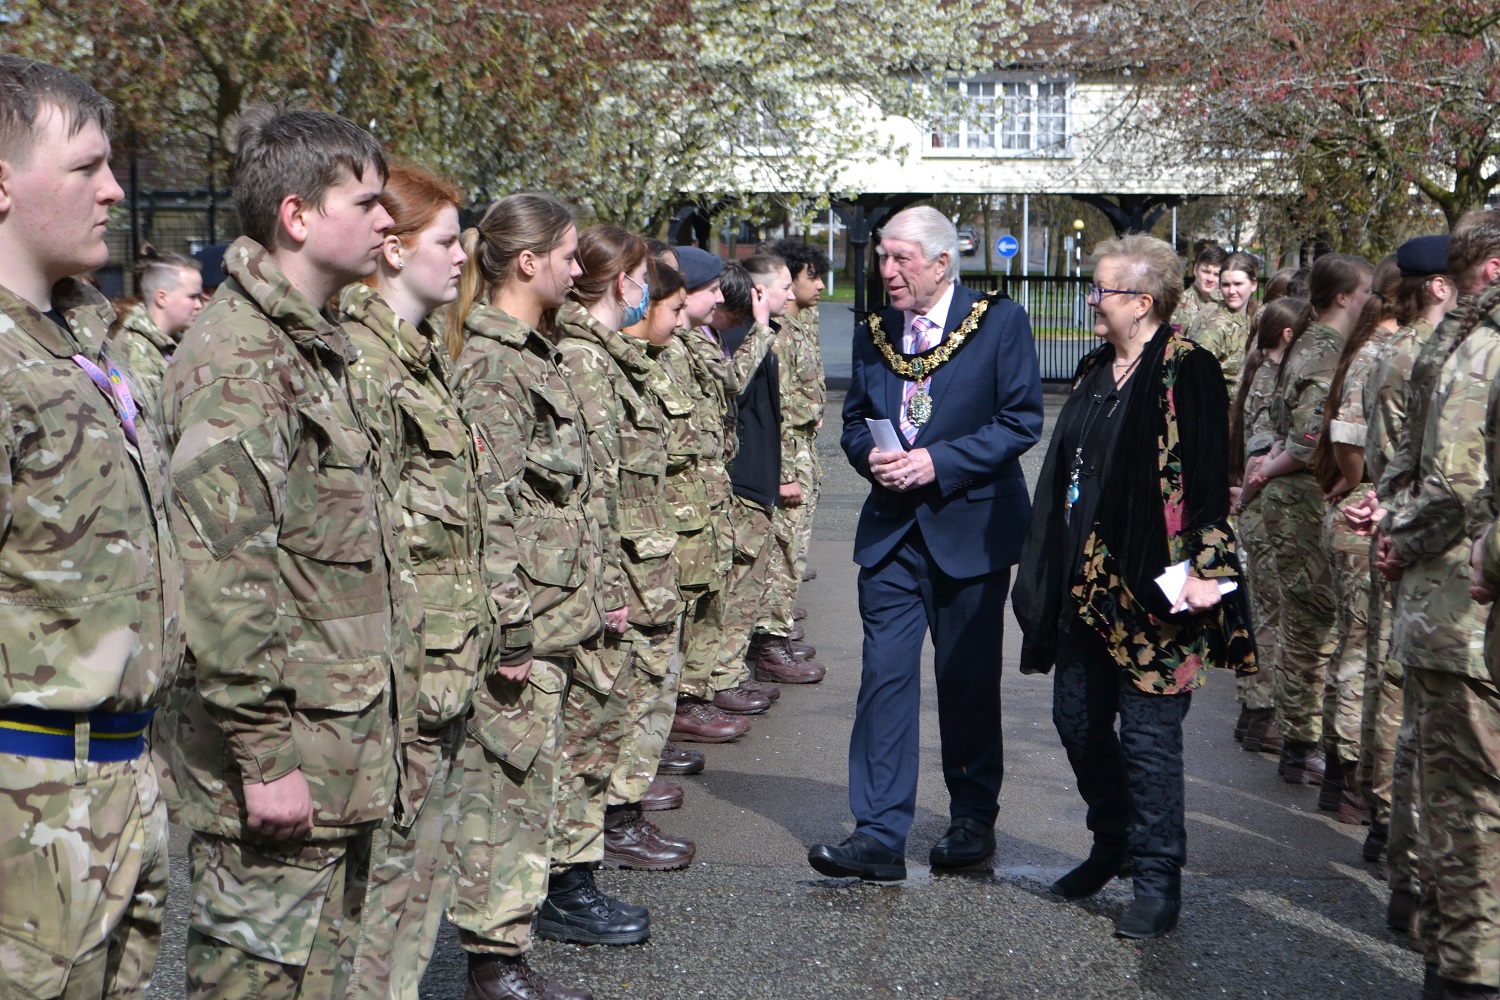 Uniformed Services students welcomed the Mayor of Wirral with a military drill